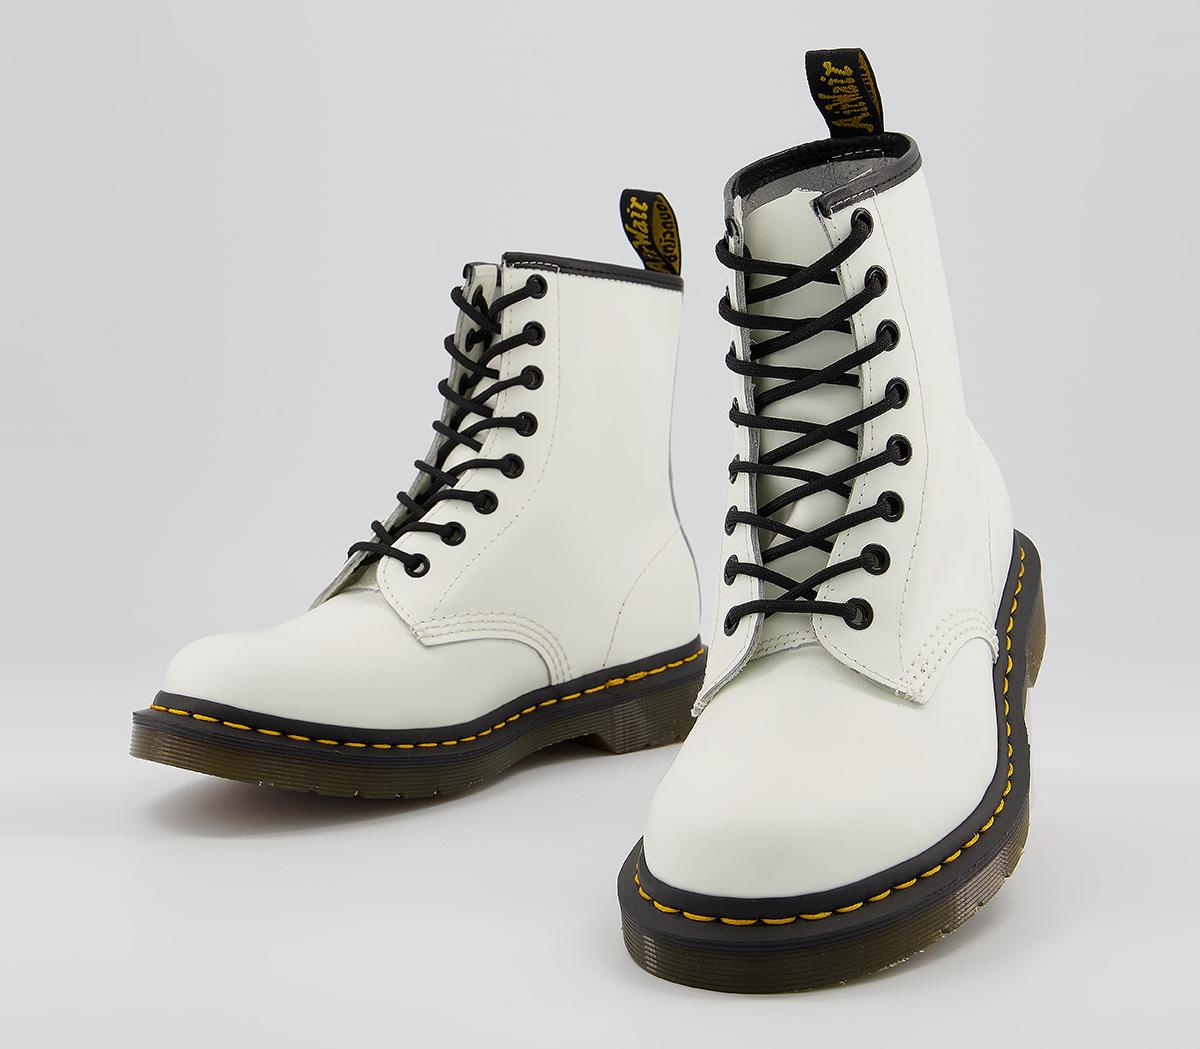 Dr. Martens 8 Eyelet Lace Up Boots White - Women's Ankle Boots